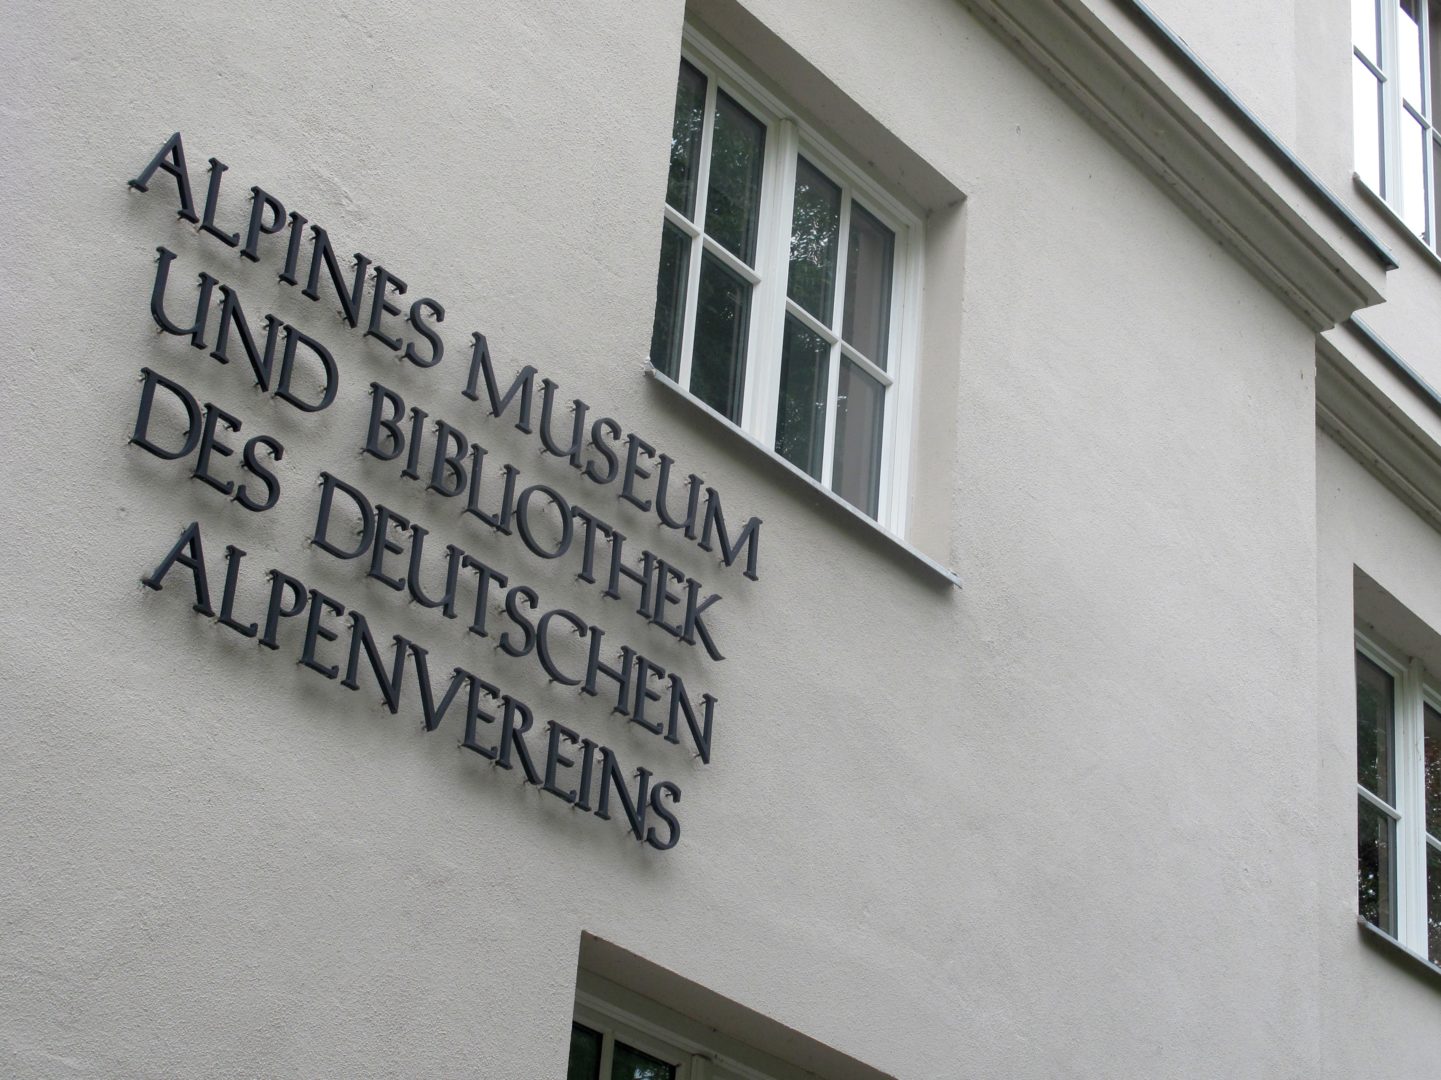 Unusual Things to Do in Munich, alpine-museum